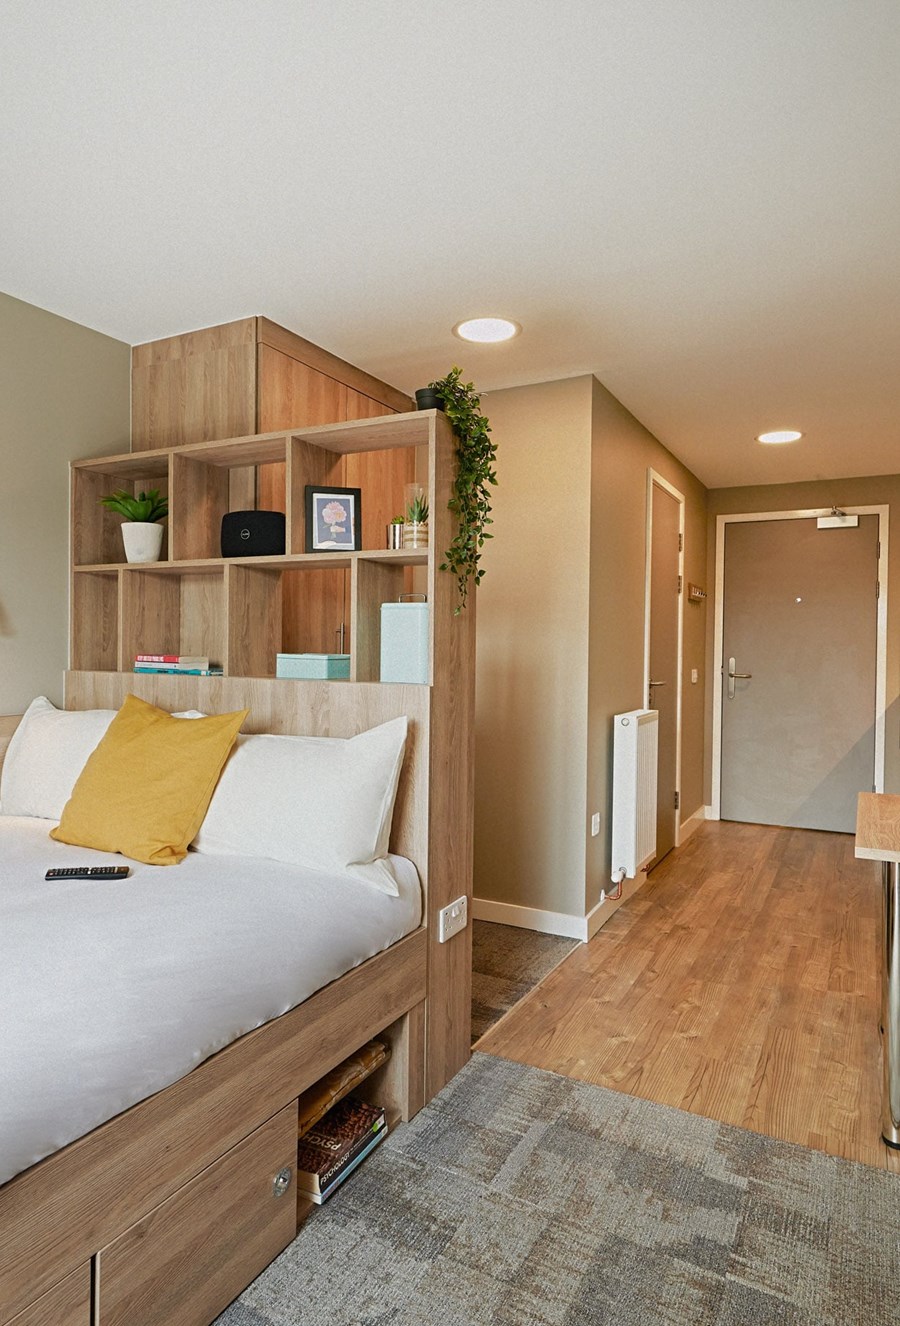 Two Bedroom Student Apartments In Reno